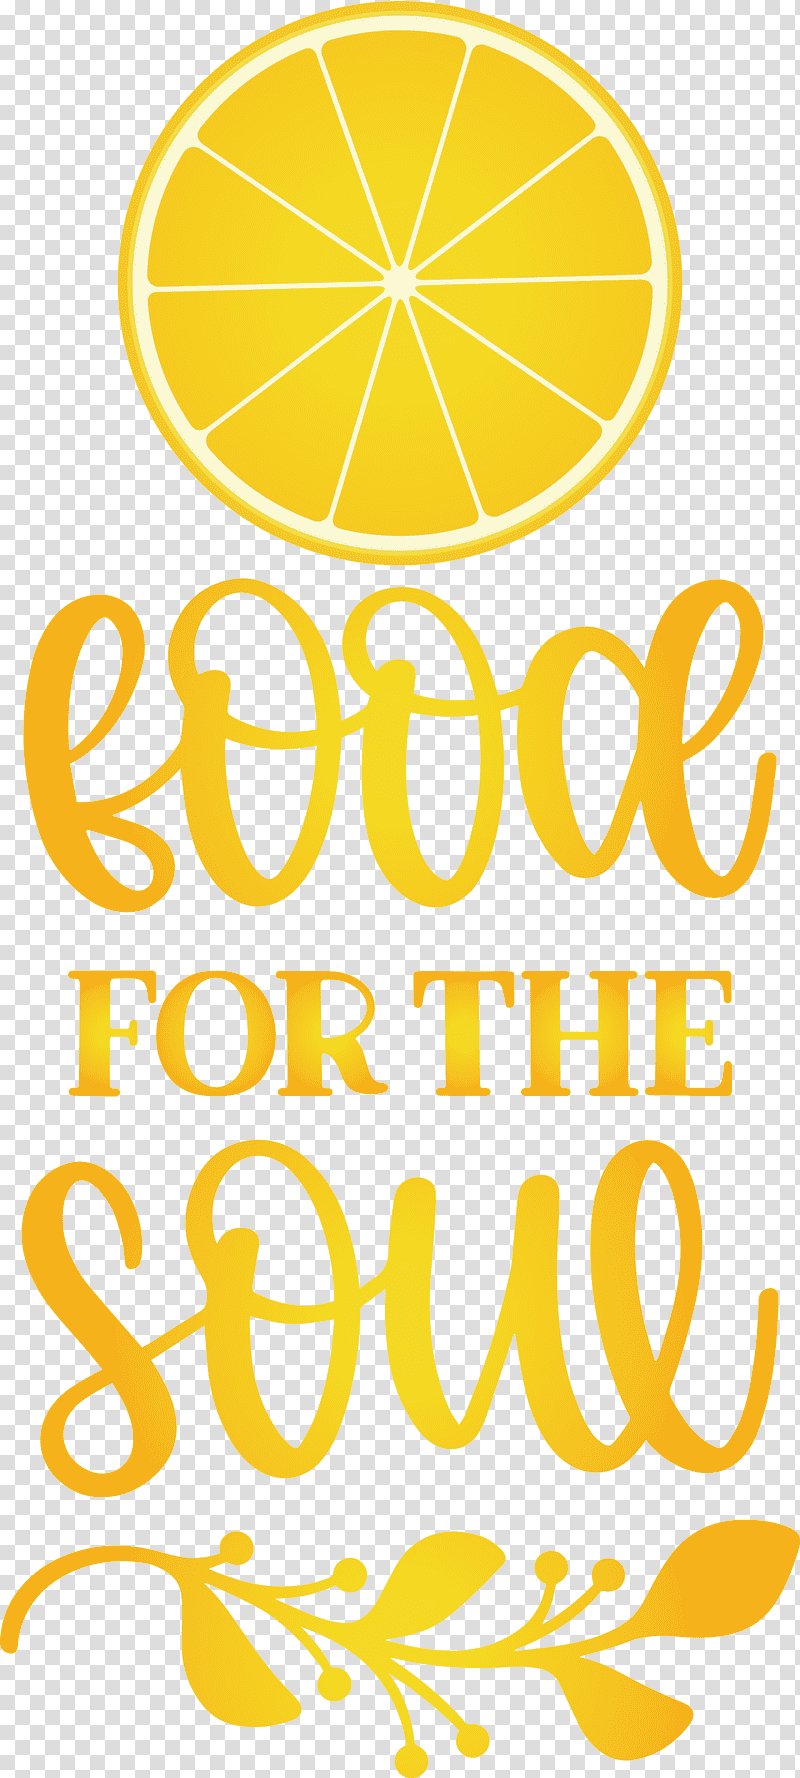 Food for the soul Food Cooking, Logo, Poster transparent background PNG clipart